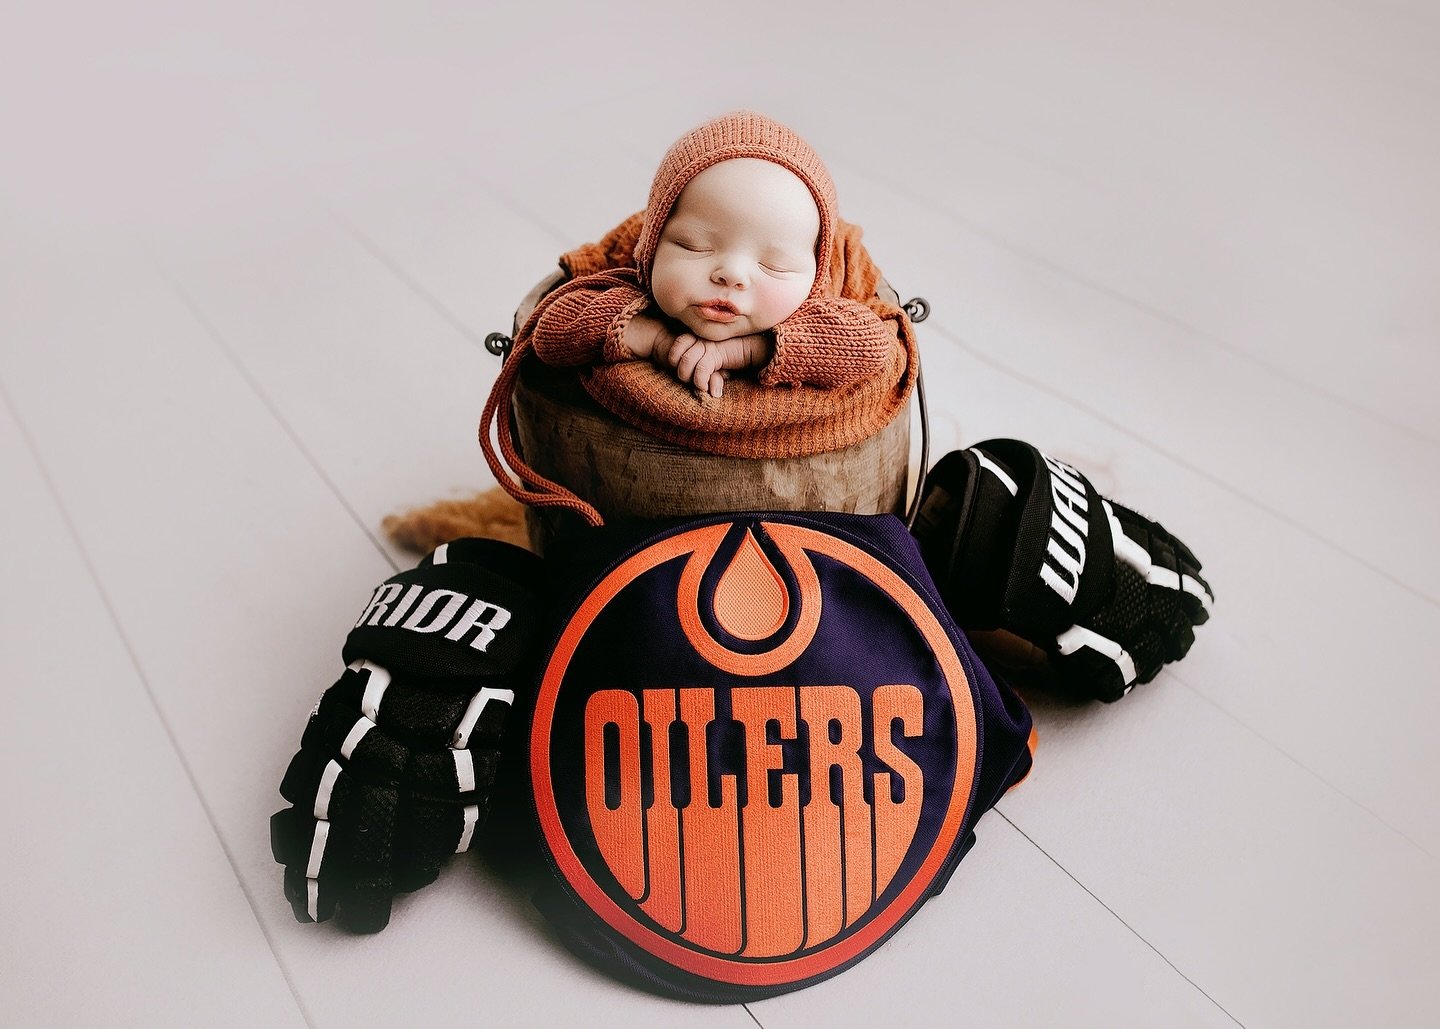 📸 Meet sweet Carson Leon, just one week old and already the newest Oilers fan in town! His parents are die-hard @edmontonoilers fans and season ticket holders hoping baby Carson brings the team some luck this year. let&rsquo;s go Oilers! 🧡💙🏒 www.